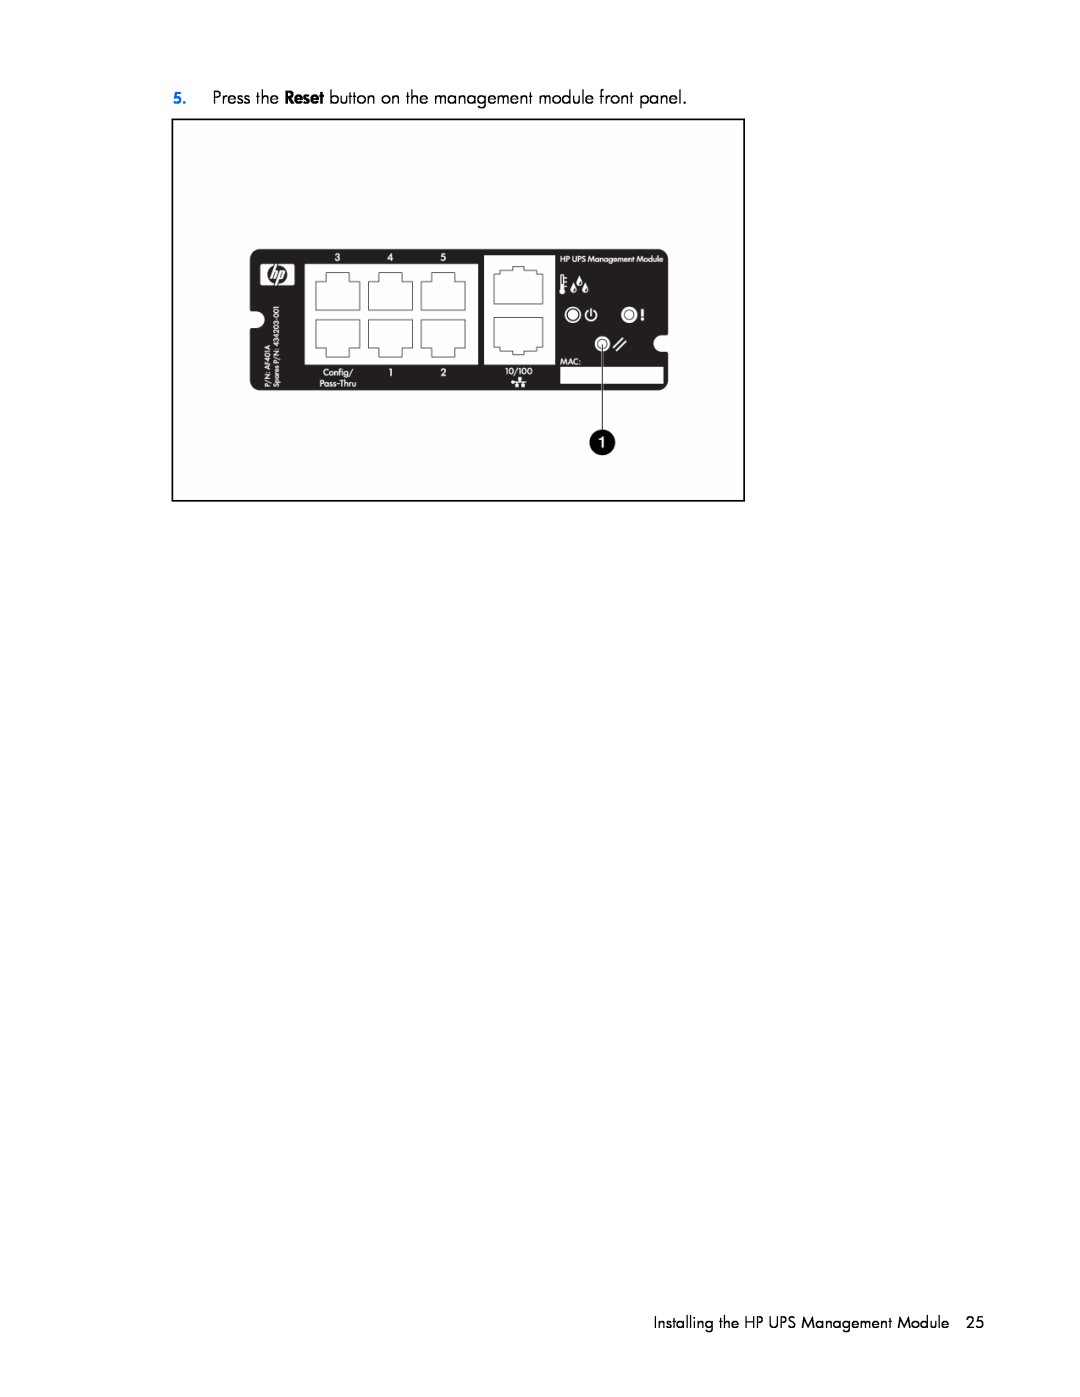 HP J4373A, A6584A Press the Reset button on the management module front panel, Installing the HP UPS Management Module 